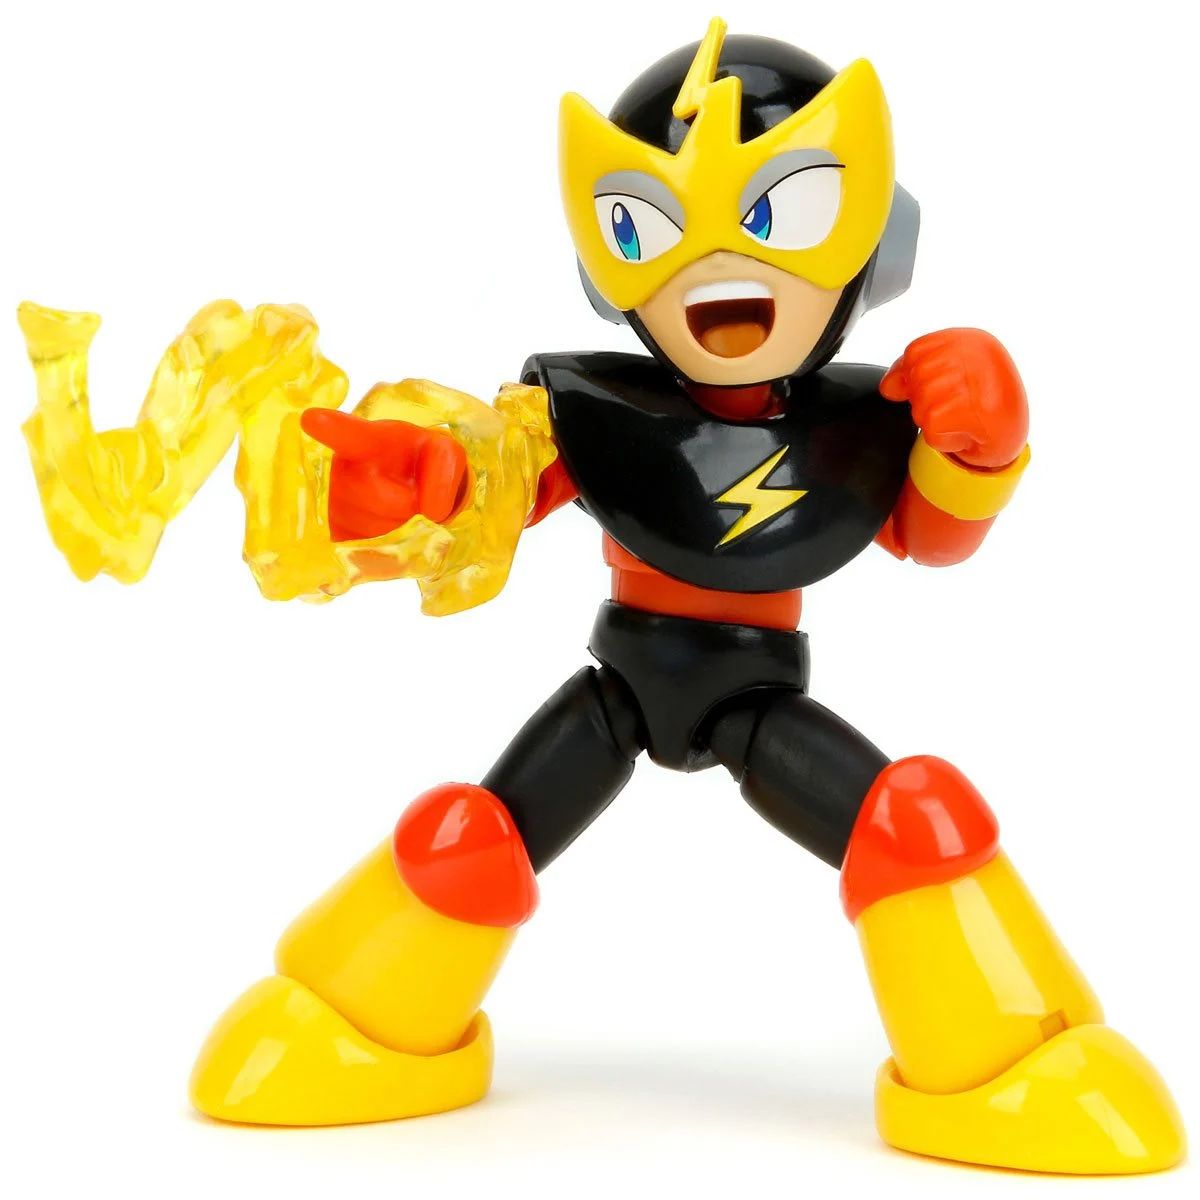 Pre-orders for Cut Man, Elec man, and Hyper Bomb Mega Man by Jada Toys are now up at...

BigBadToyStore:
bigbadtoystore.com/Search?HideInS…
Entertainment Earth:
entertainmentearth.com/s/?query1=mega…